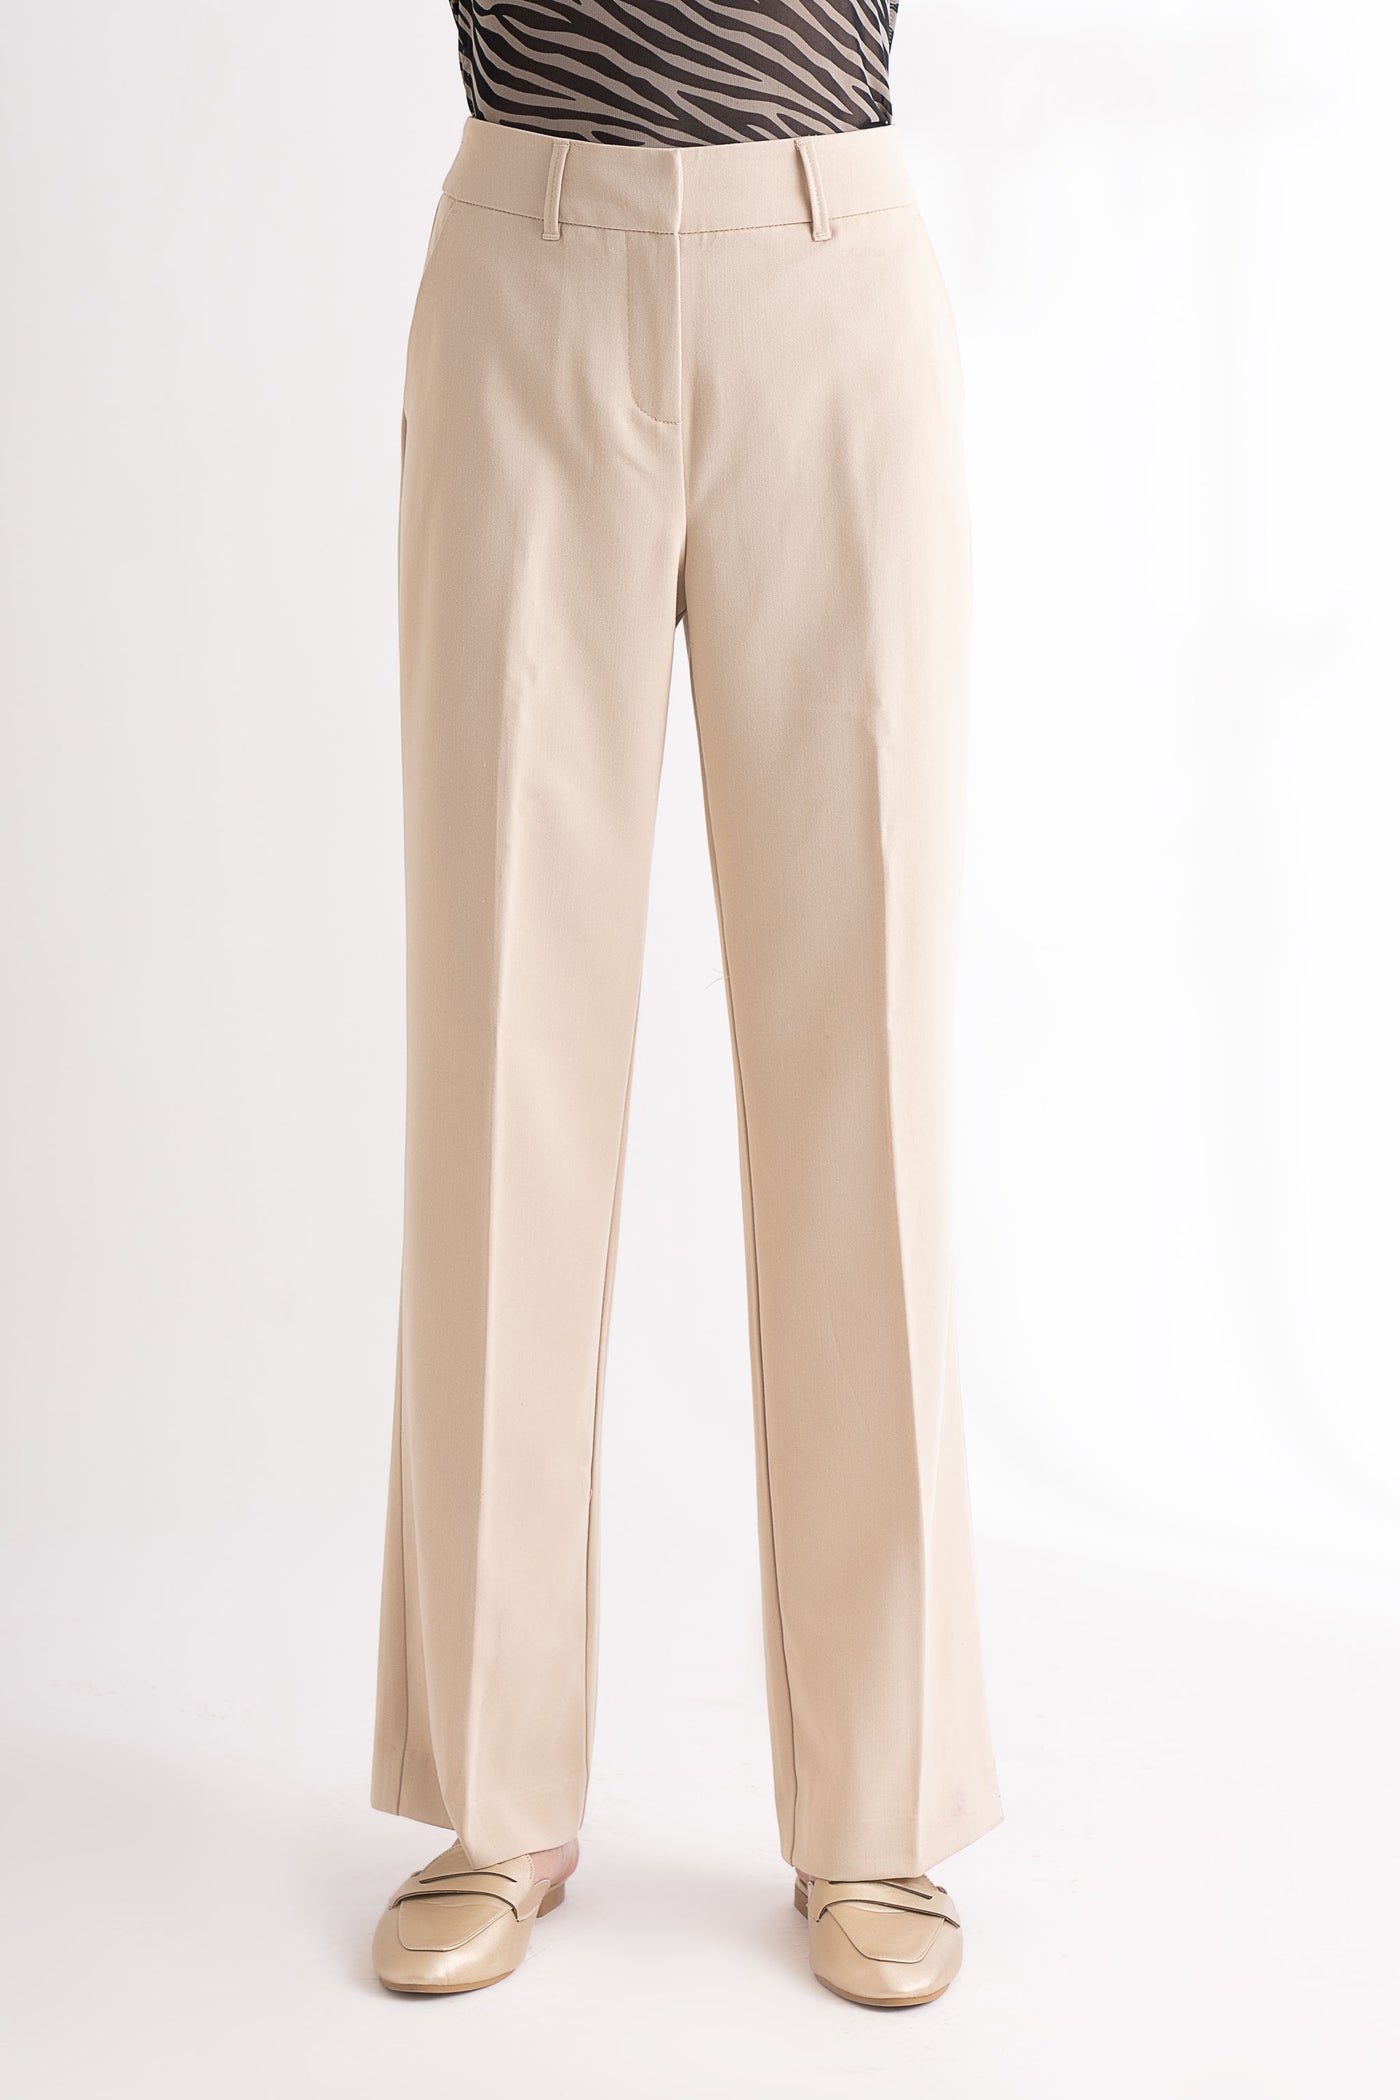 Sand Trousers